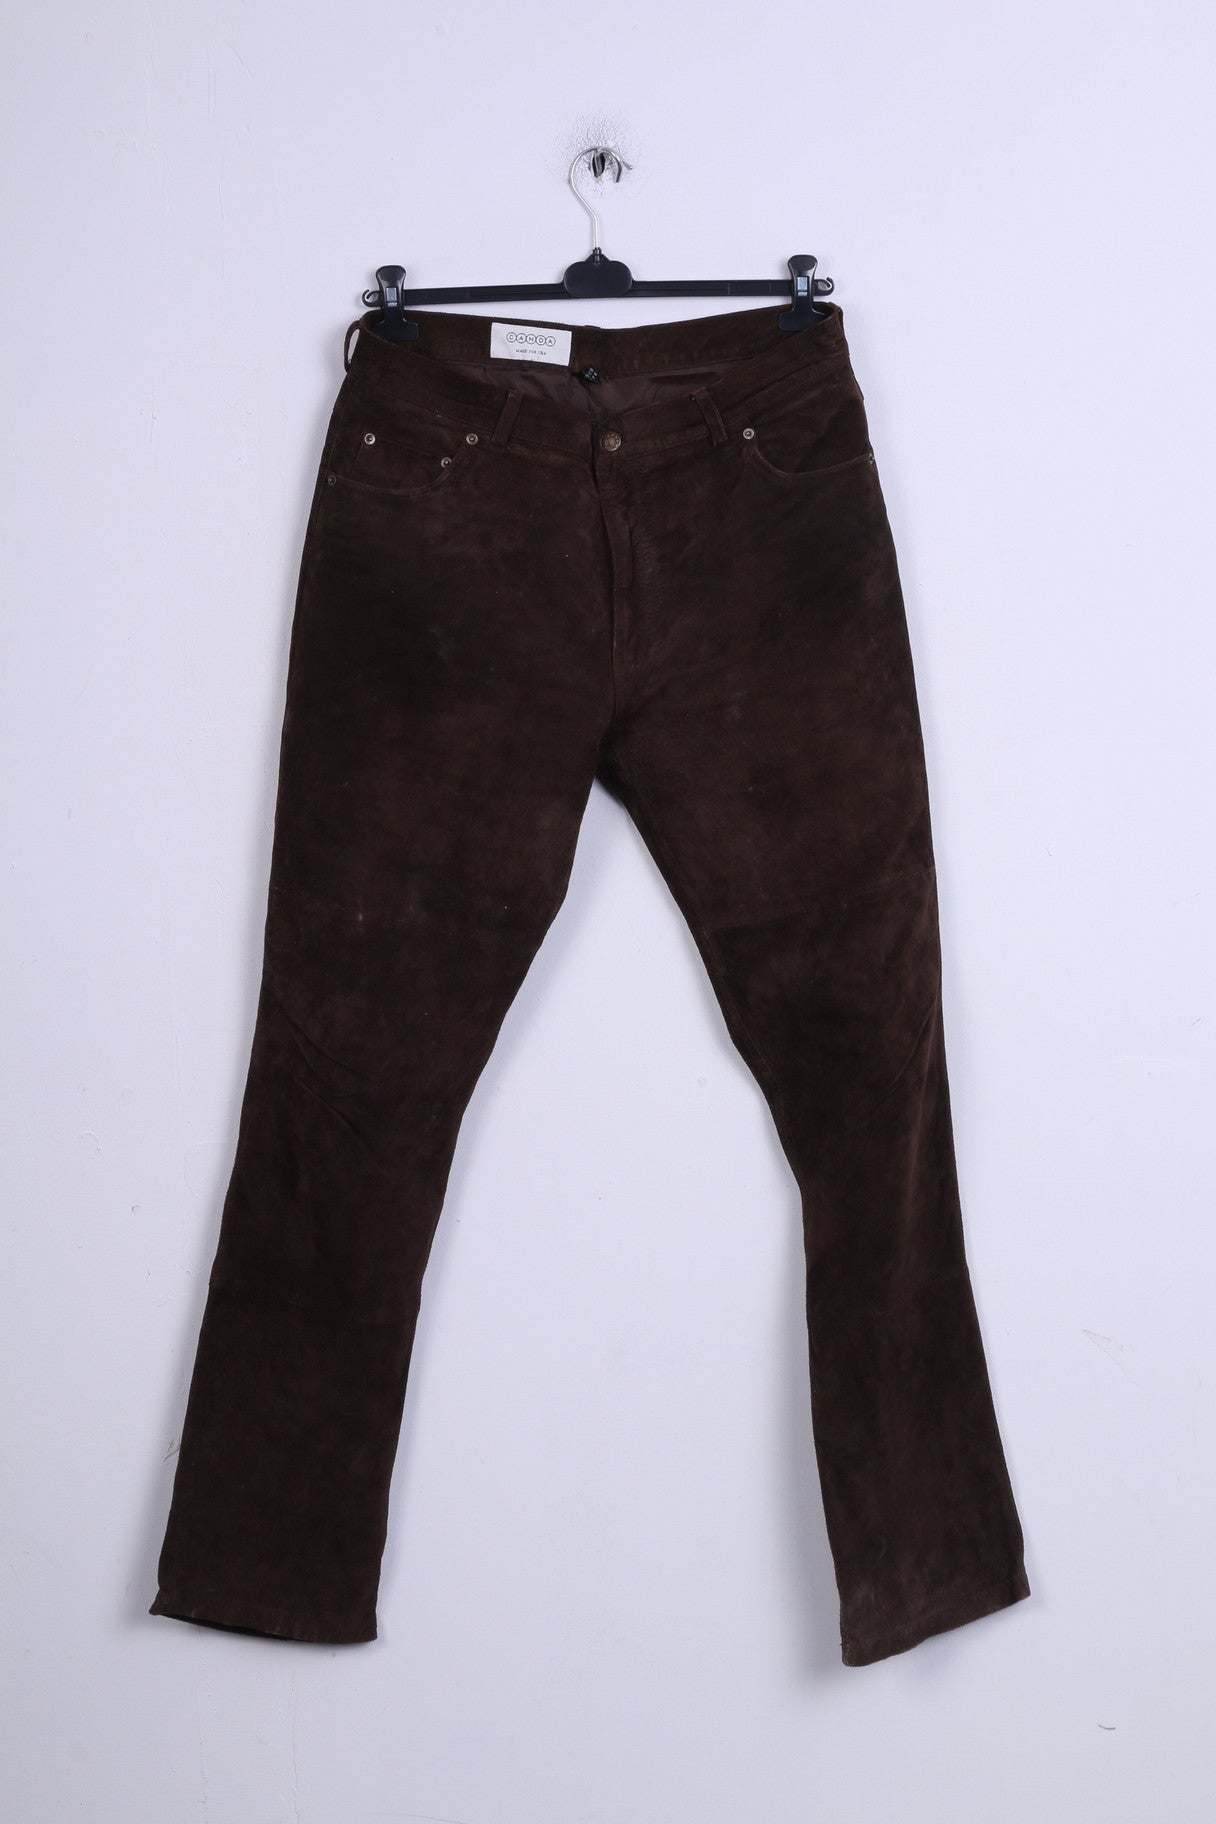 C&A Canada Womens 54 XL Trousers Pants Leather Vintage Brown